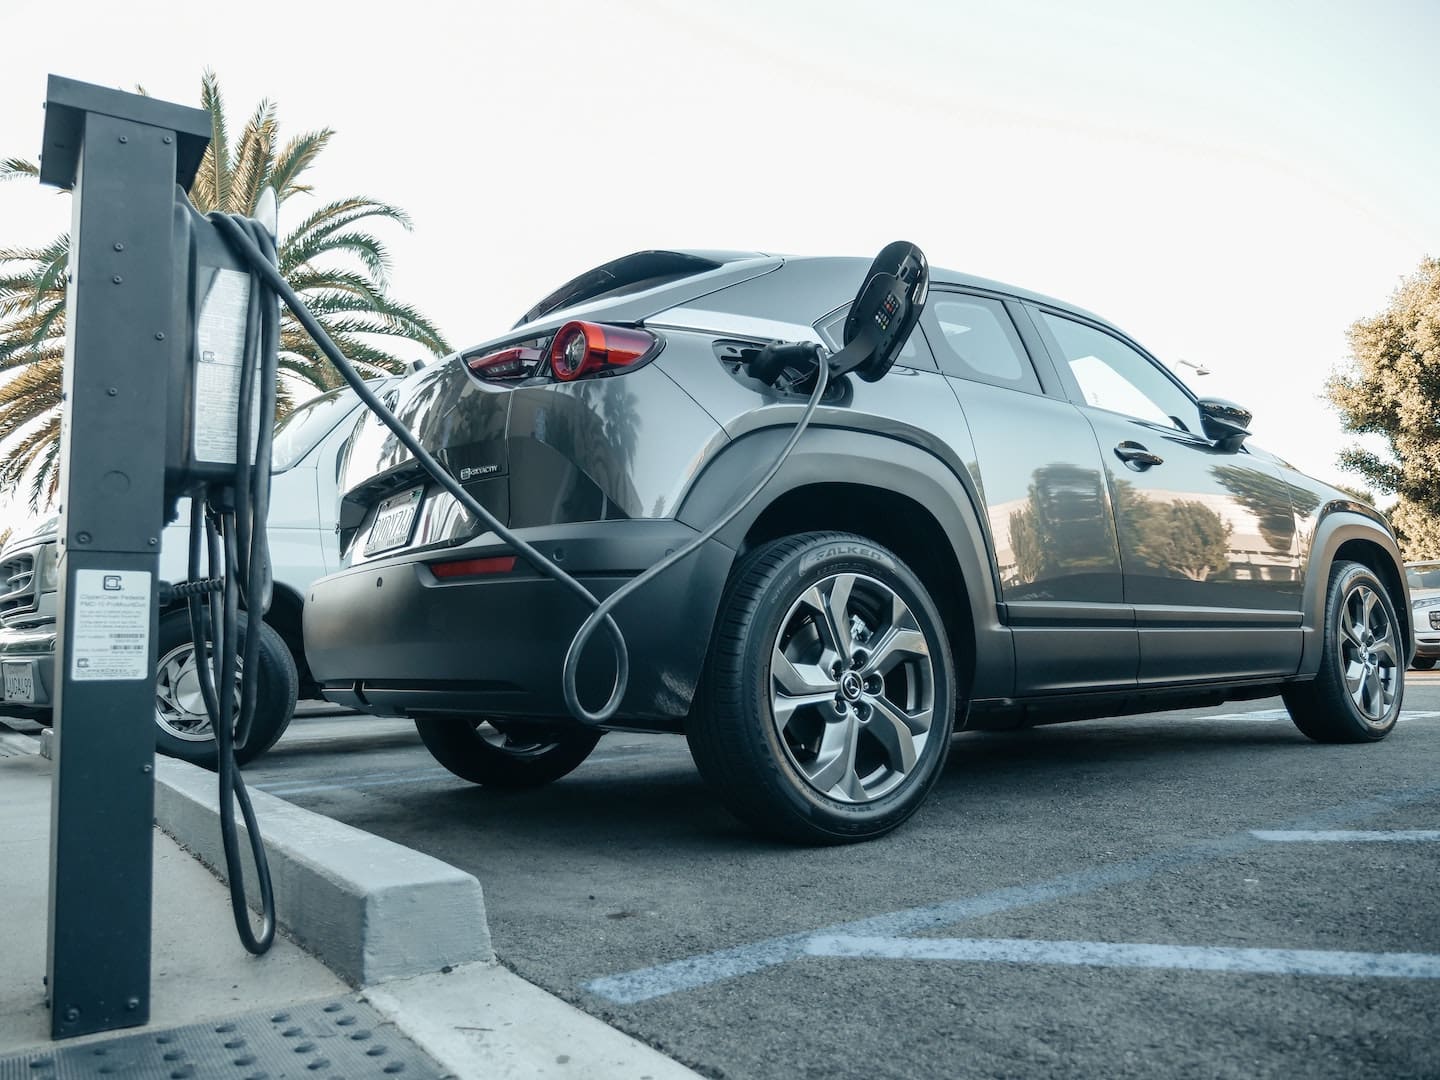 Delaware is developing plans to increase the number of charging stations for electric vehicles. (Kindel Media photo from Pexels)